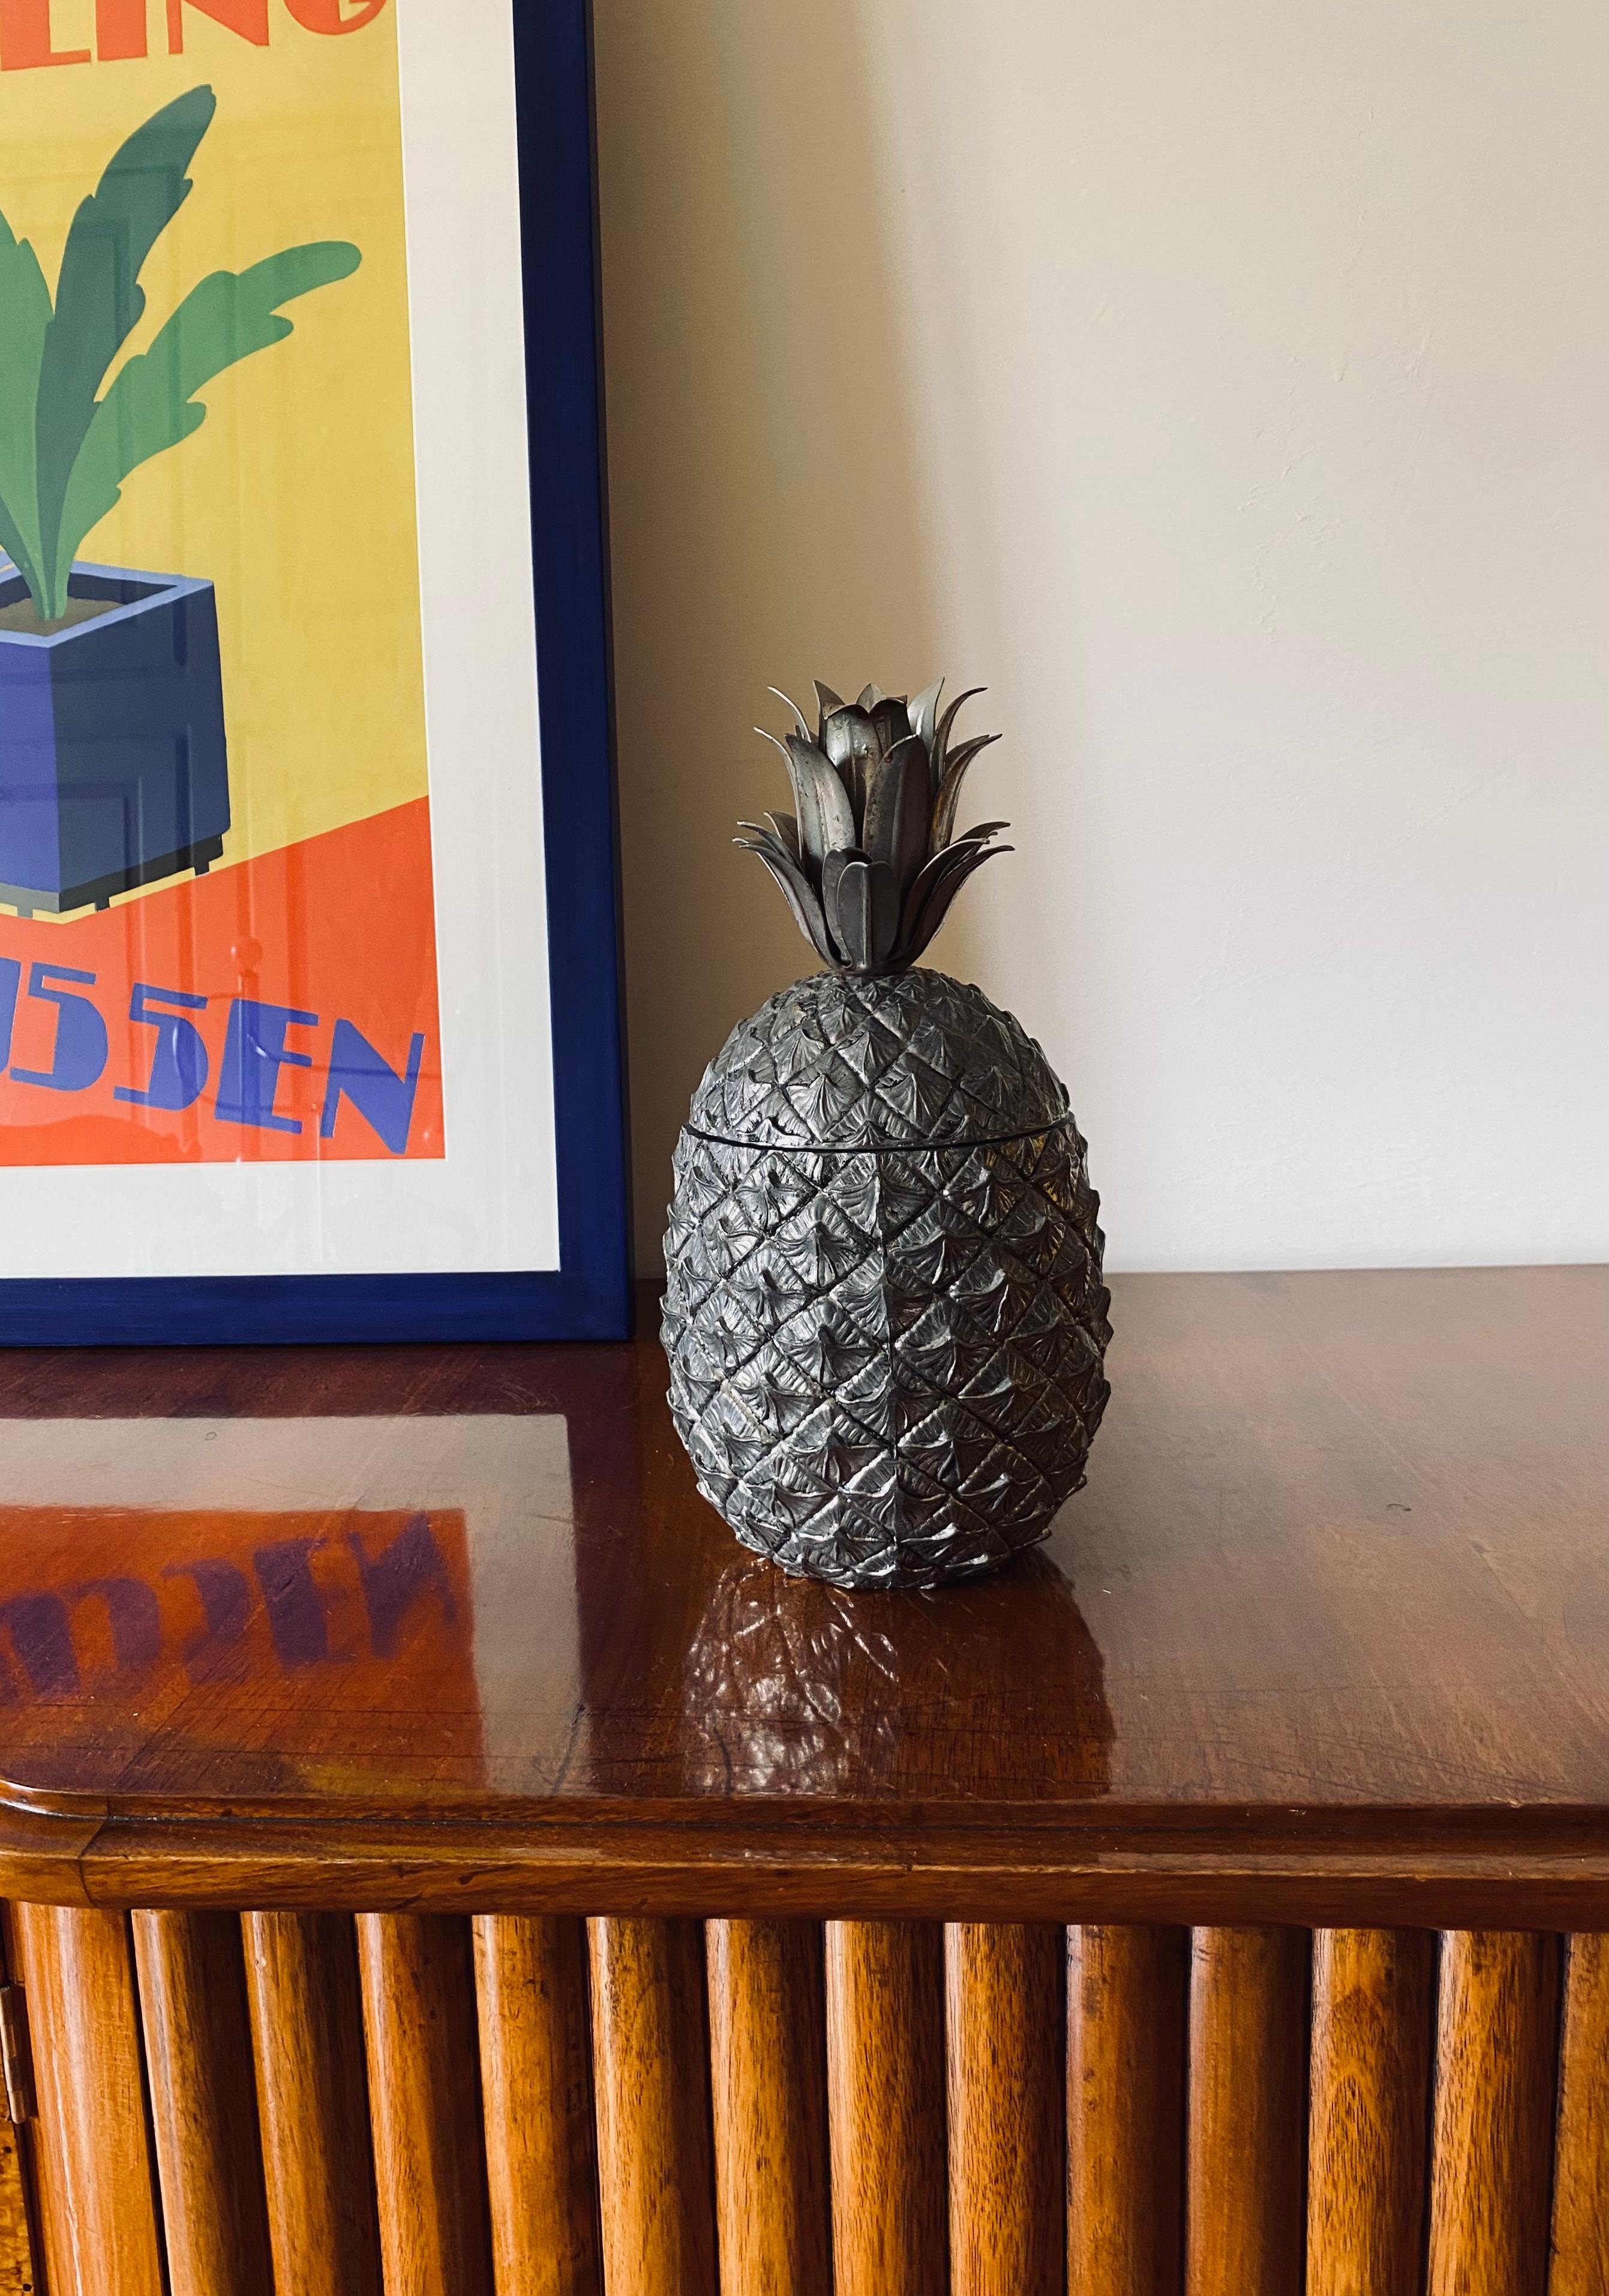 Pineapple shaped mid-century ice bucket designed by Mauro Manetti

Mauro Manetti, Fonderie d'Arte. Florence, Italy 1970s

27 cm H - 15 cm diam.

Signed on the base. 

Conditions: very good consistent with age and use.